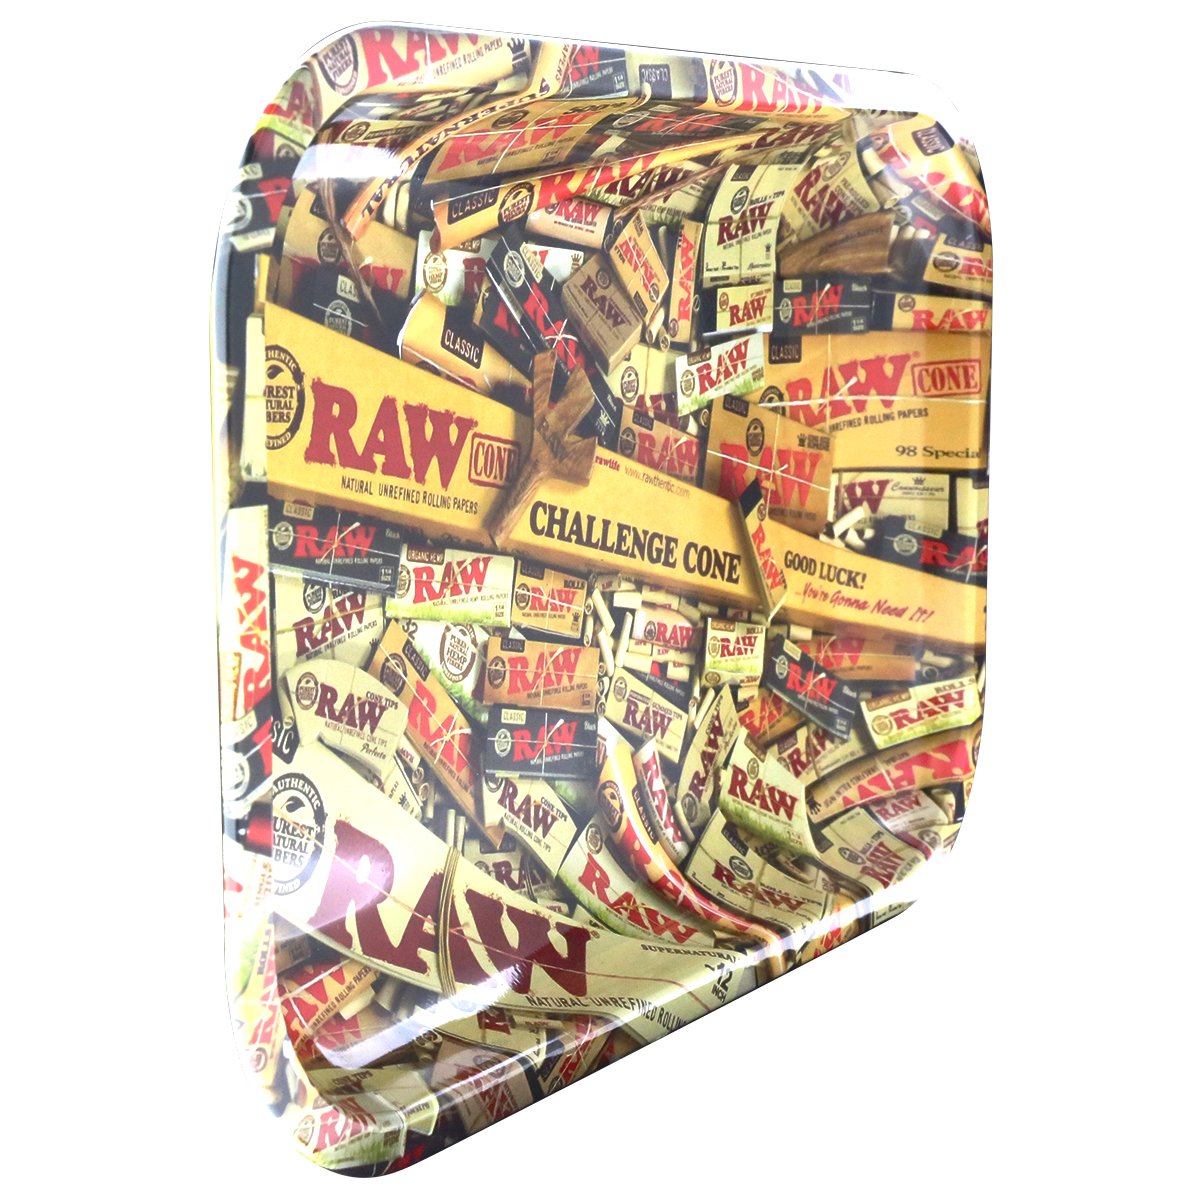 Raw Product Mix Rolling Tray Small 1 Unit (11X7) Accessories